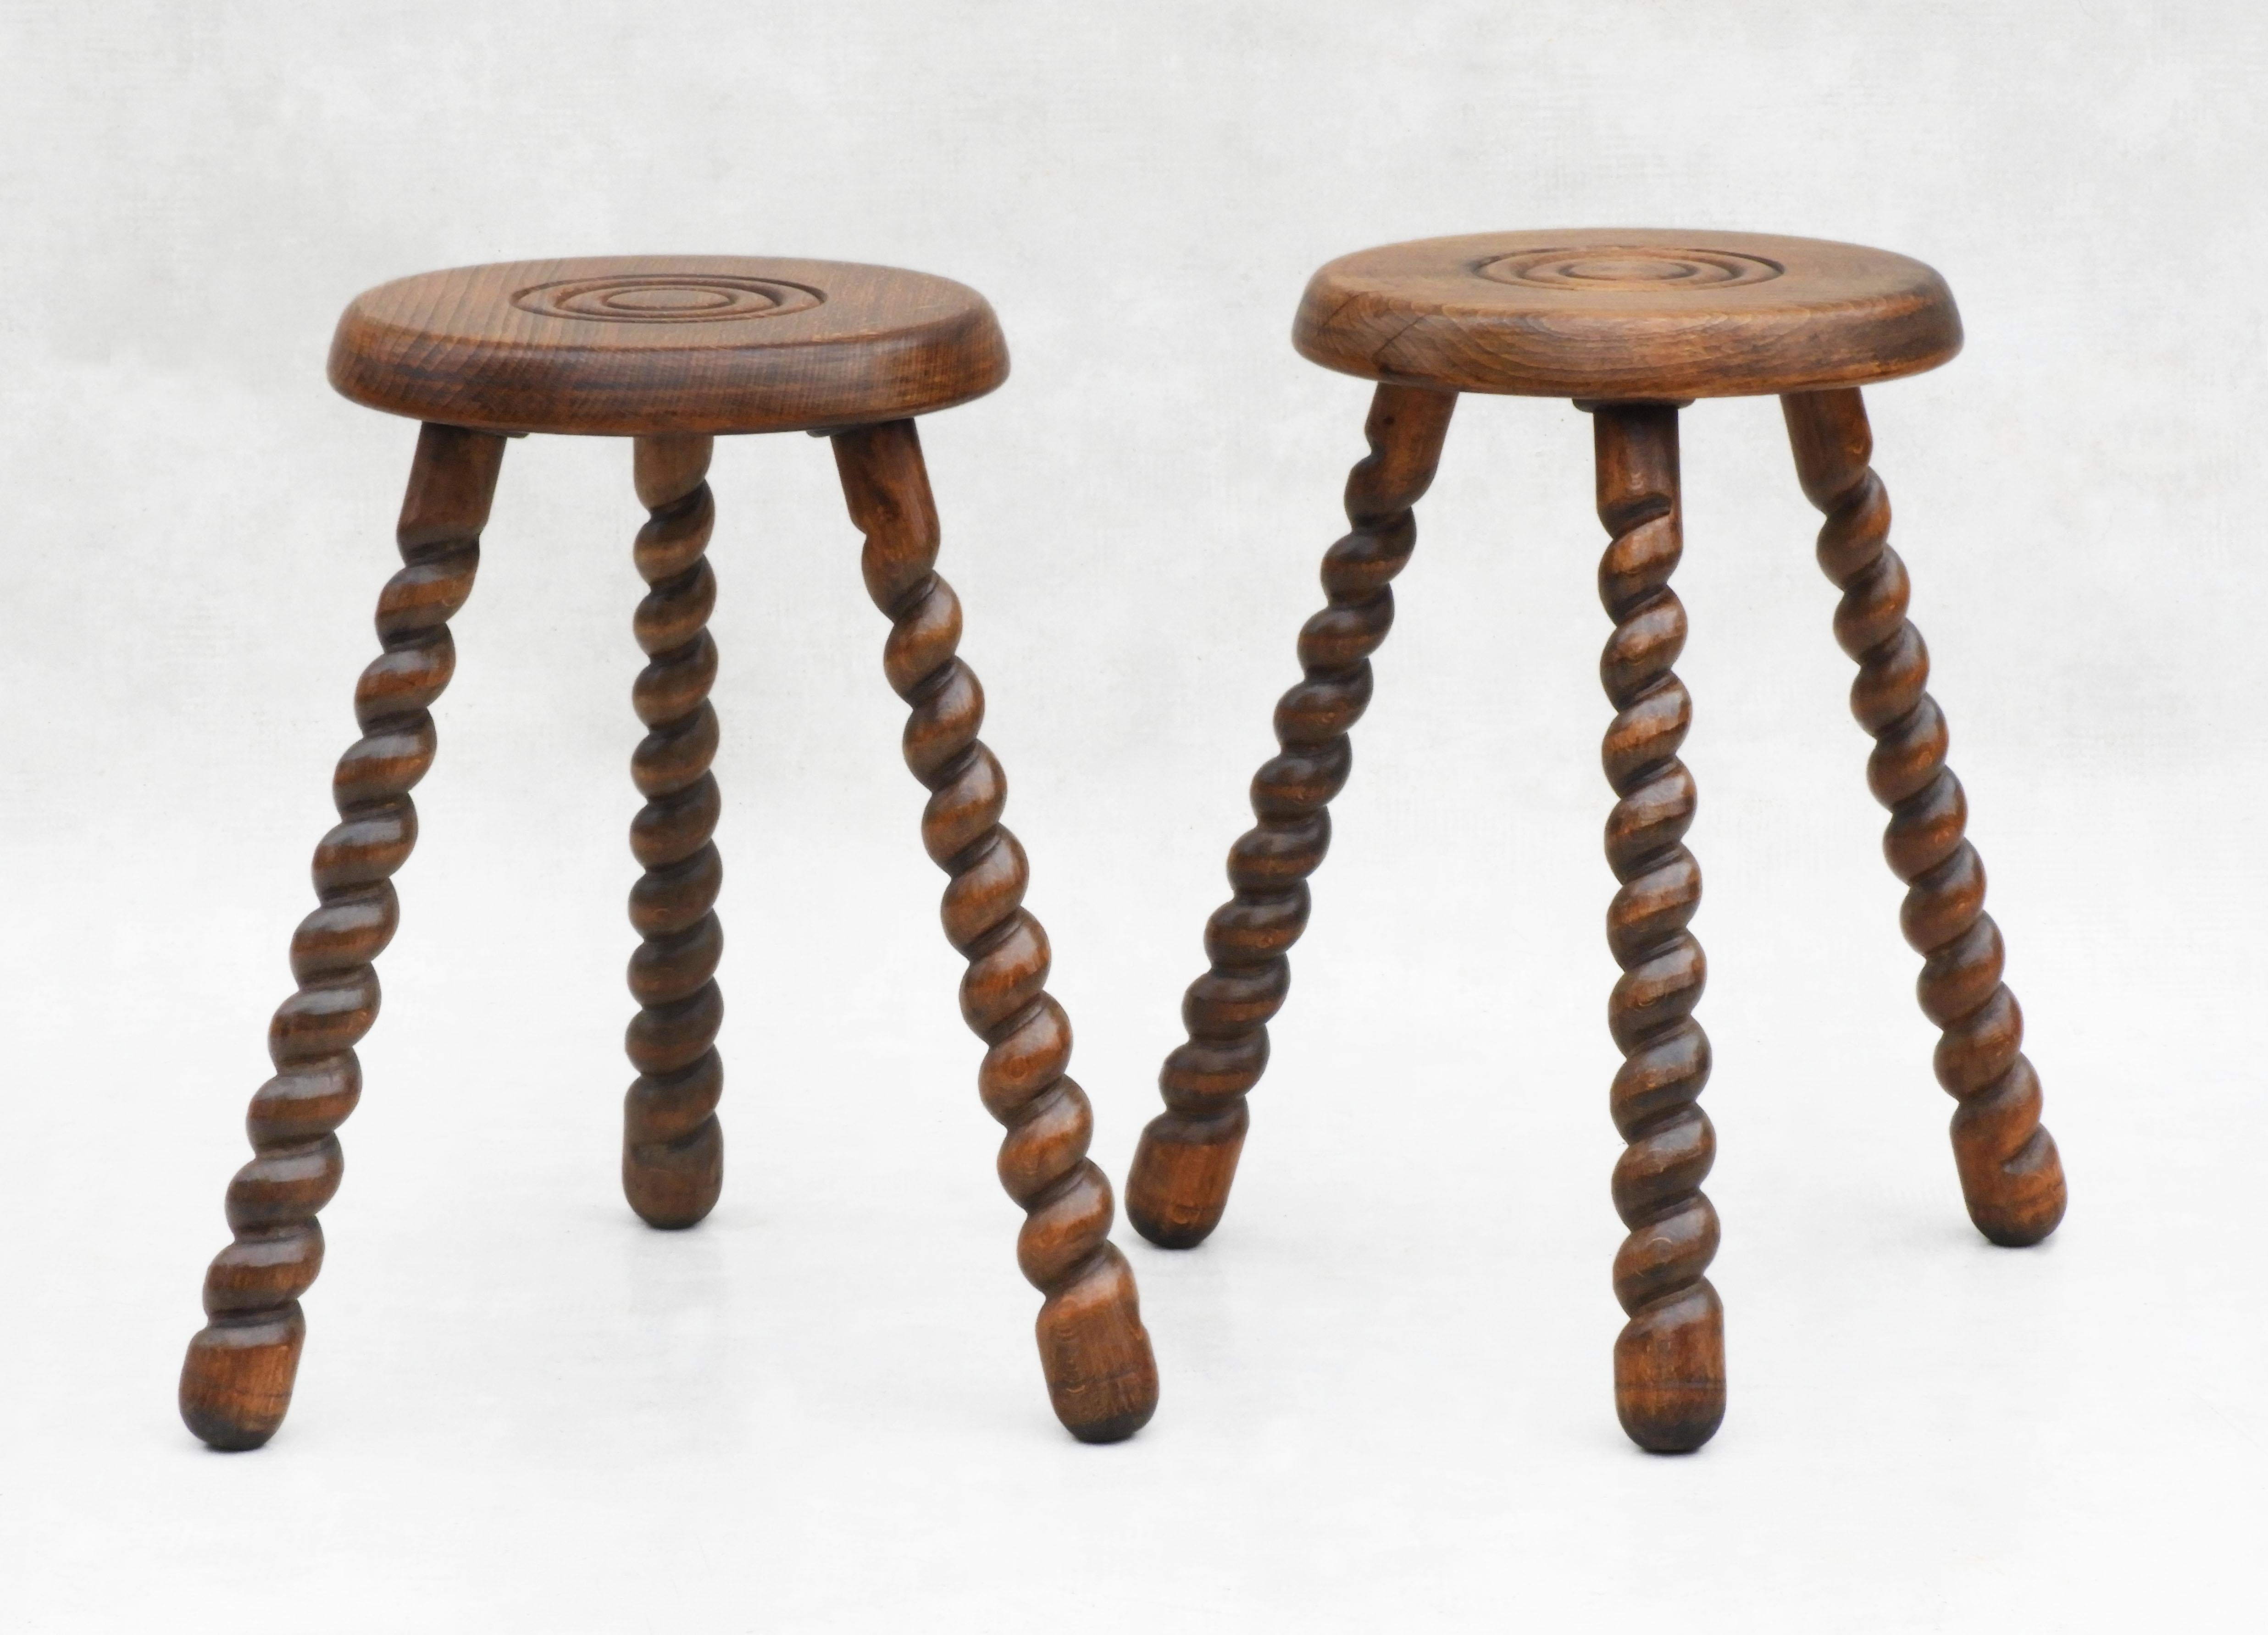 Fabulous pair of oak tripod stools from mid-century France.  Beautifully turned and carved with barley twist legs and circular seats.  Versatile three-legged tabouret stools, which could also be used as nightstands or side tables.  Good grain with